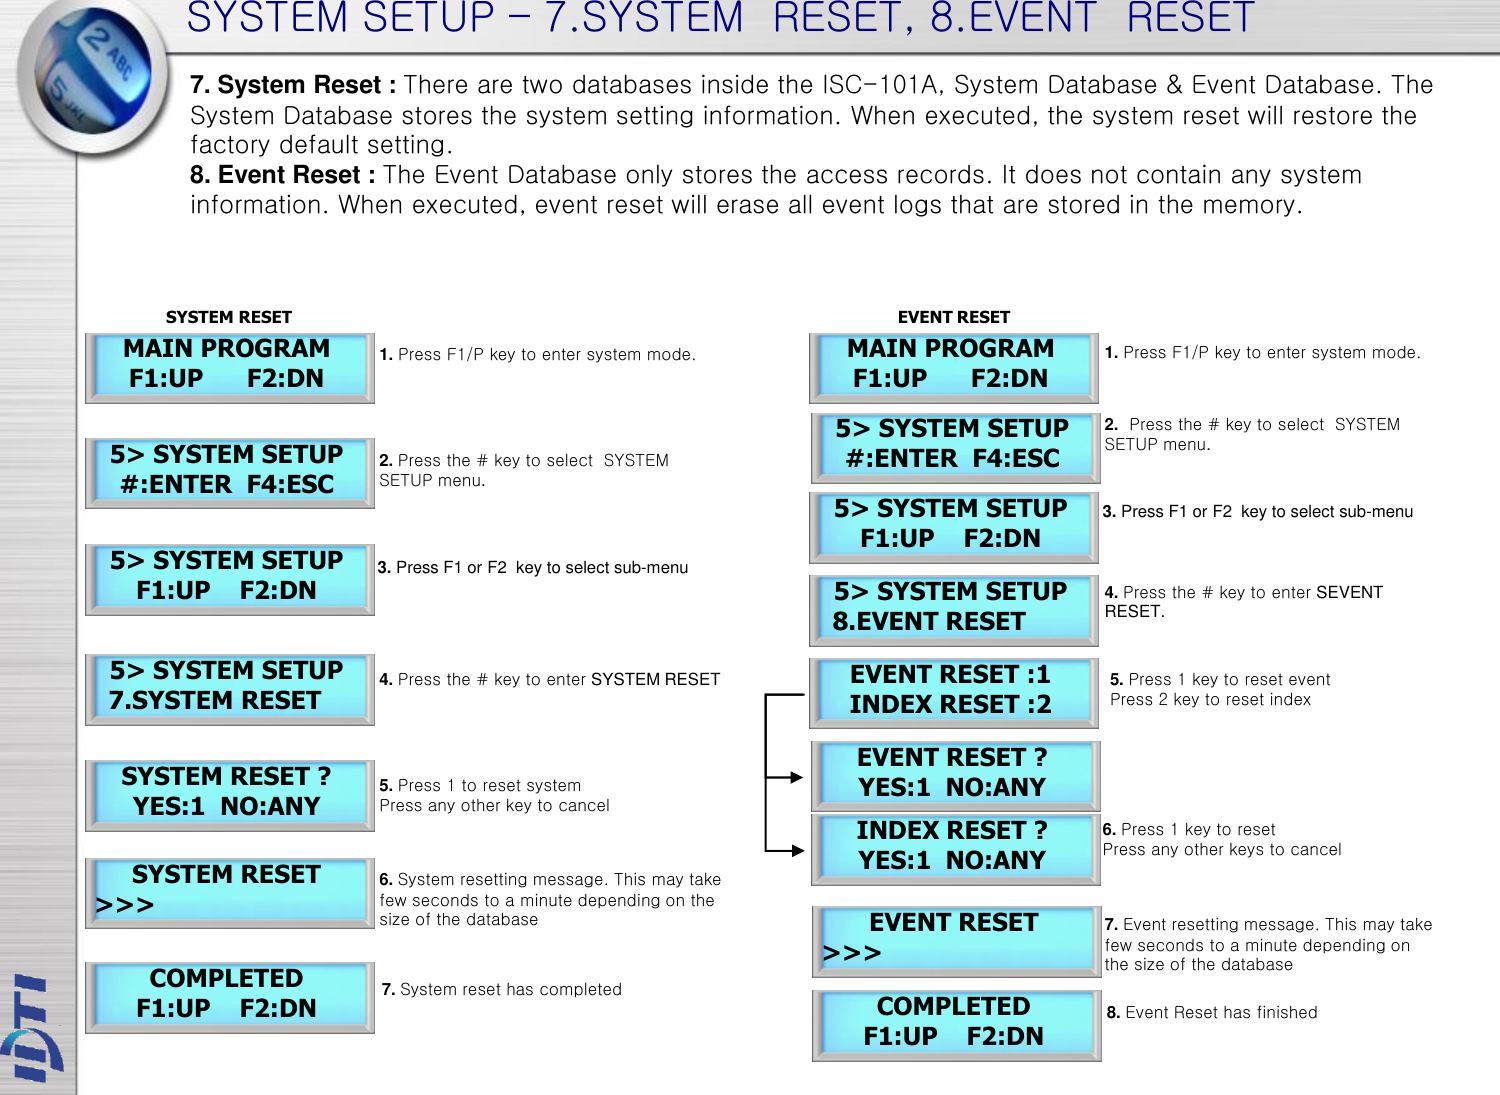 SYSTEM SETUP – 7.SYSTEM  RESET, 8.EVENT  RESET 5&gt; SYSTEM SETUP   7.SYSTEM RESET SYSTEM RESET ? YES:1  NO:ANY MAIN PROGRAM F1:UP      F2:DN 5&gt; SYSTEM SETUP #:ENTER  F4:ESC 5&gt; SYSTEM SETUP F1:UP    F2:DN SYSTEM RESET &gt;&gt;&gt; COMPLETED F1:UP    F2:DN 7. System Reset : There are two databases inside the ISC-101A, System Database &amp; Event Database. The System Database stores the system setting information. When executed, the system reset will restore the factory default setting.  8. Event Reset : The Event Database only stores the access records. It does not contain any system information. When executed, event reset will erase all event logs that are stored in the memory. 5&gt; SYSTEM SETUP   8.EVENT RESET EVENT RESET ? YES:1  NO:ANY MAIN PROGRAM F1:UP      F2:DN 5&gt; SYSTEM SETUP #:ENTER  F4:ESC 5&gt; SYSTEM SETUP F1:UP    F2:DN EVENT RESET &gt;&gt;&gt; COMPLETED F1:UP    F2:DN SYSTEM RESET EVENT RESET EVENT RESET :1 INDEX RESET :2 INDEX RESET ? YES:1  NO:ANY 1. Press F1/P key to enter system mode. 2. Press the # key to select  SYSTEM SETUP menu. 4. Press the # key to enter SYSTEM RESET 5. Press 1 to reset system Press any other key to cancel 6. System resetting message. This may take few seconds to a minute depending on the size of the database 3. Press F1 or F2  key to select sub-menu 7. System reset has completed 1. Press F1/P key to enter system mode. 2.  Press the # key to select  SYSTEM SETUP menu. 4. Press the # key to enter SEVENT RESET. 6. Press 1 key to reset  Press any other keys to cancel 7. Event resetting message. This may take few seconds to a minute depending on the size of the database 3. Press F1 or F2  key to select sub-menu 8. Event Reset has finished 5. Press 1 key to reset event  Press 2 key to reset index 